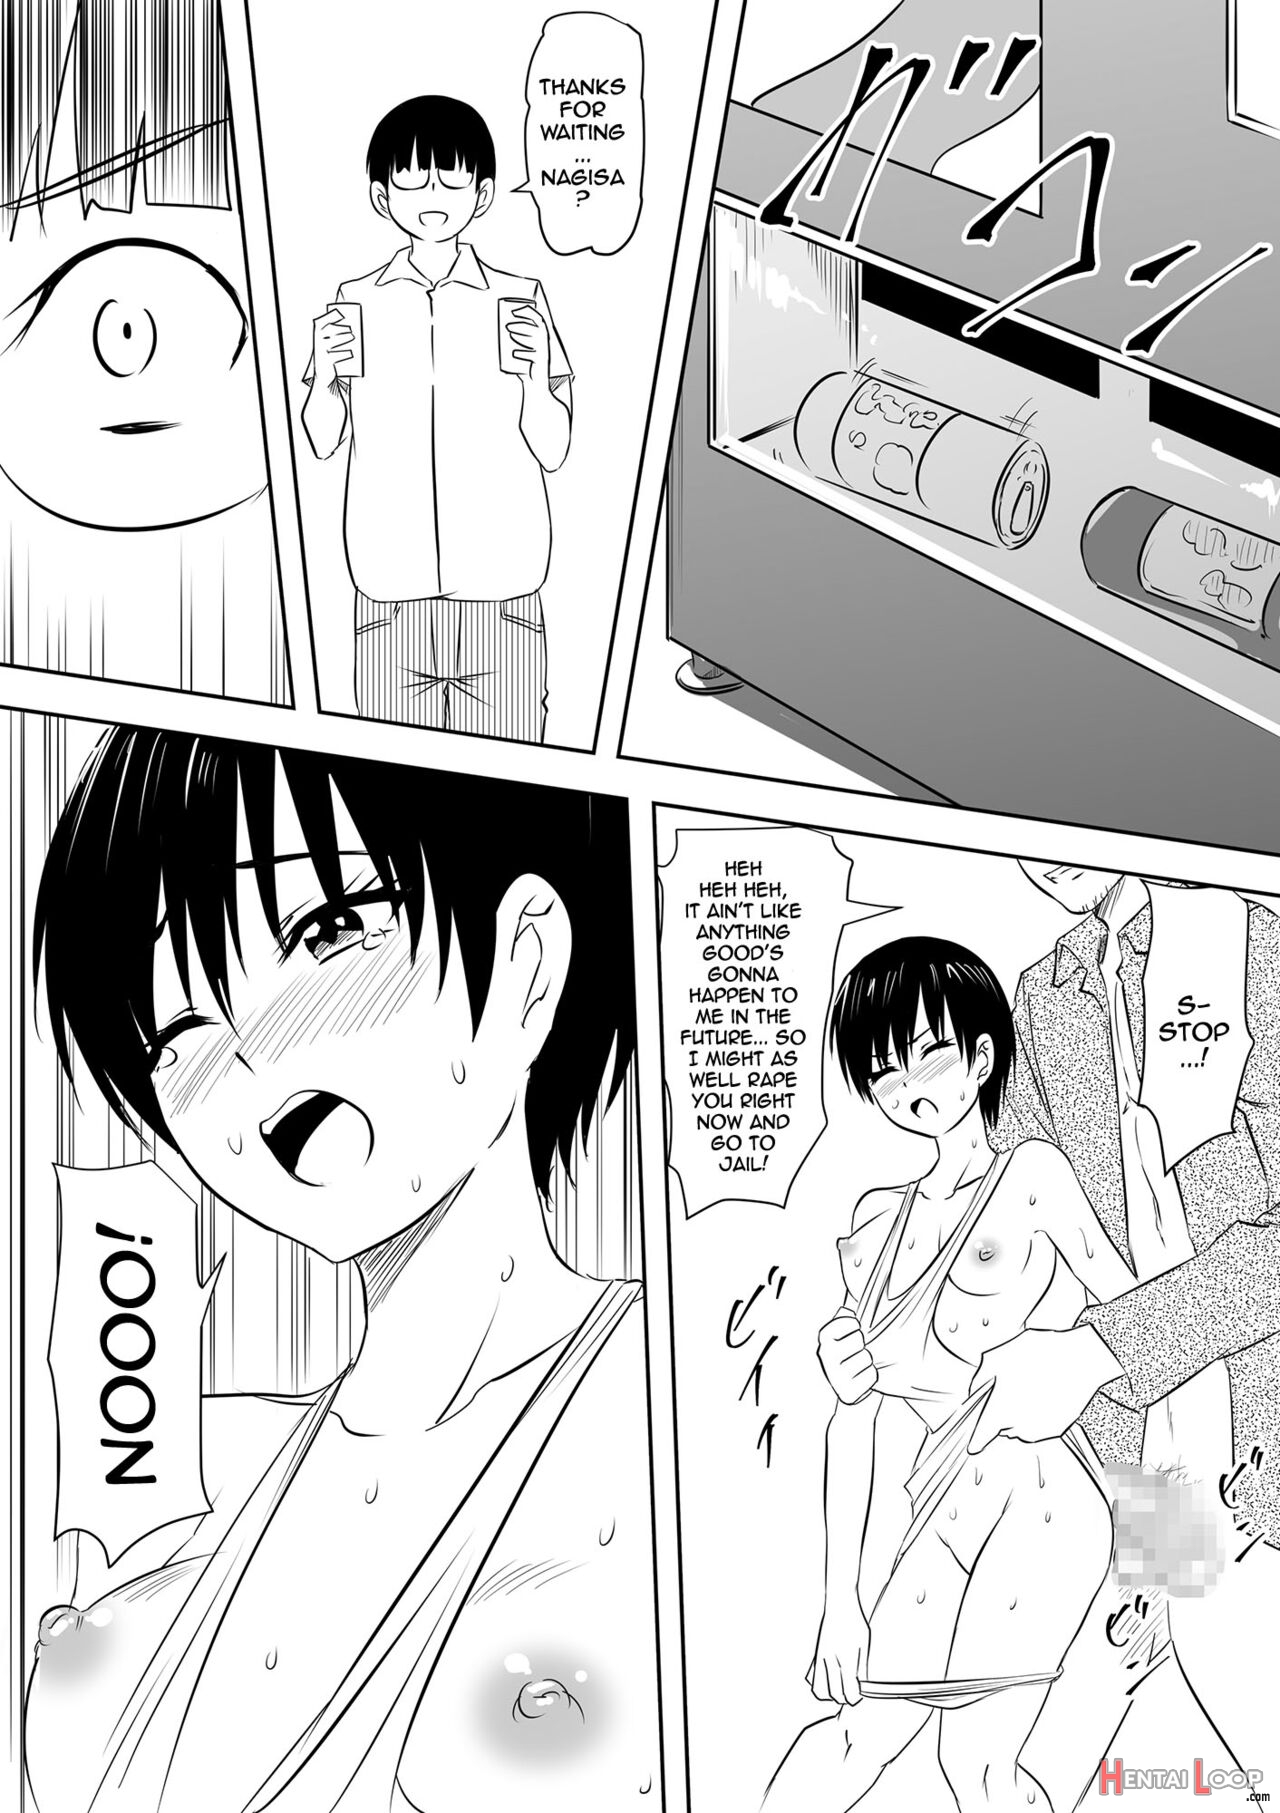 Development Records Of An Asocial Otaku And A Brown Tomboy Going At It Over And Over page 15